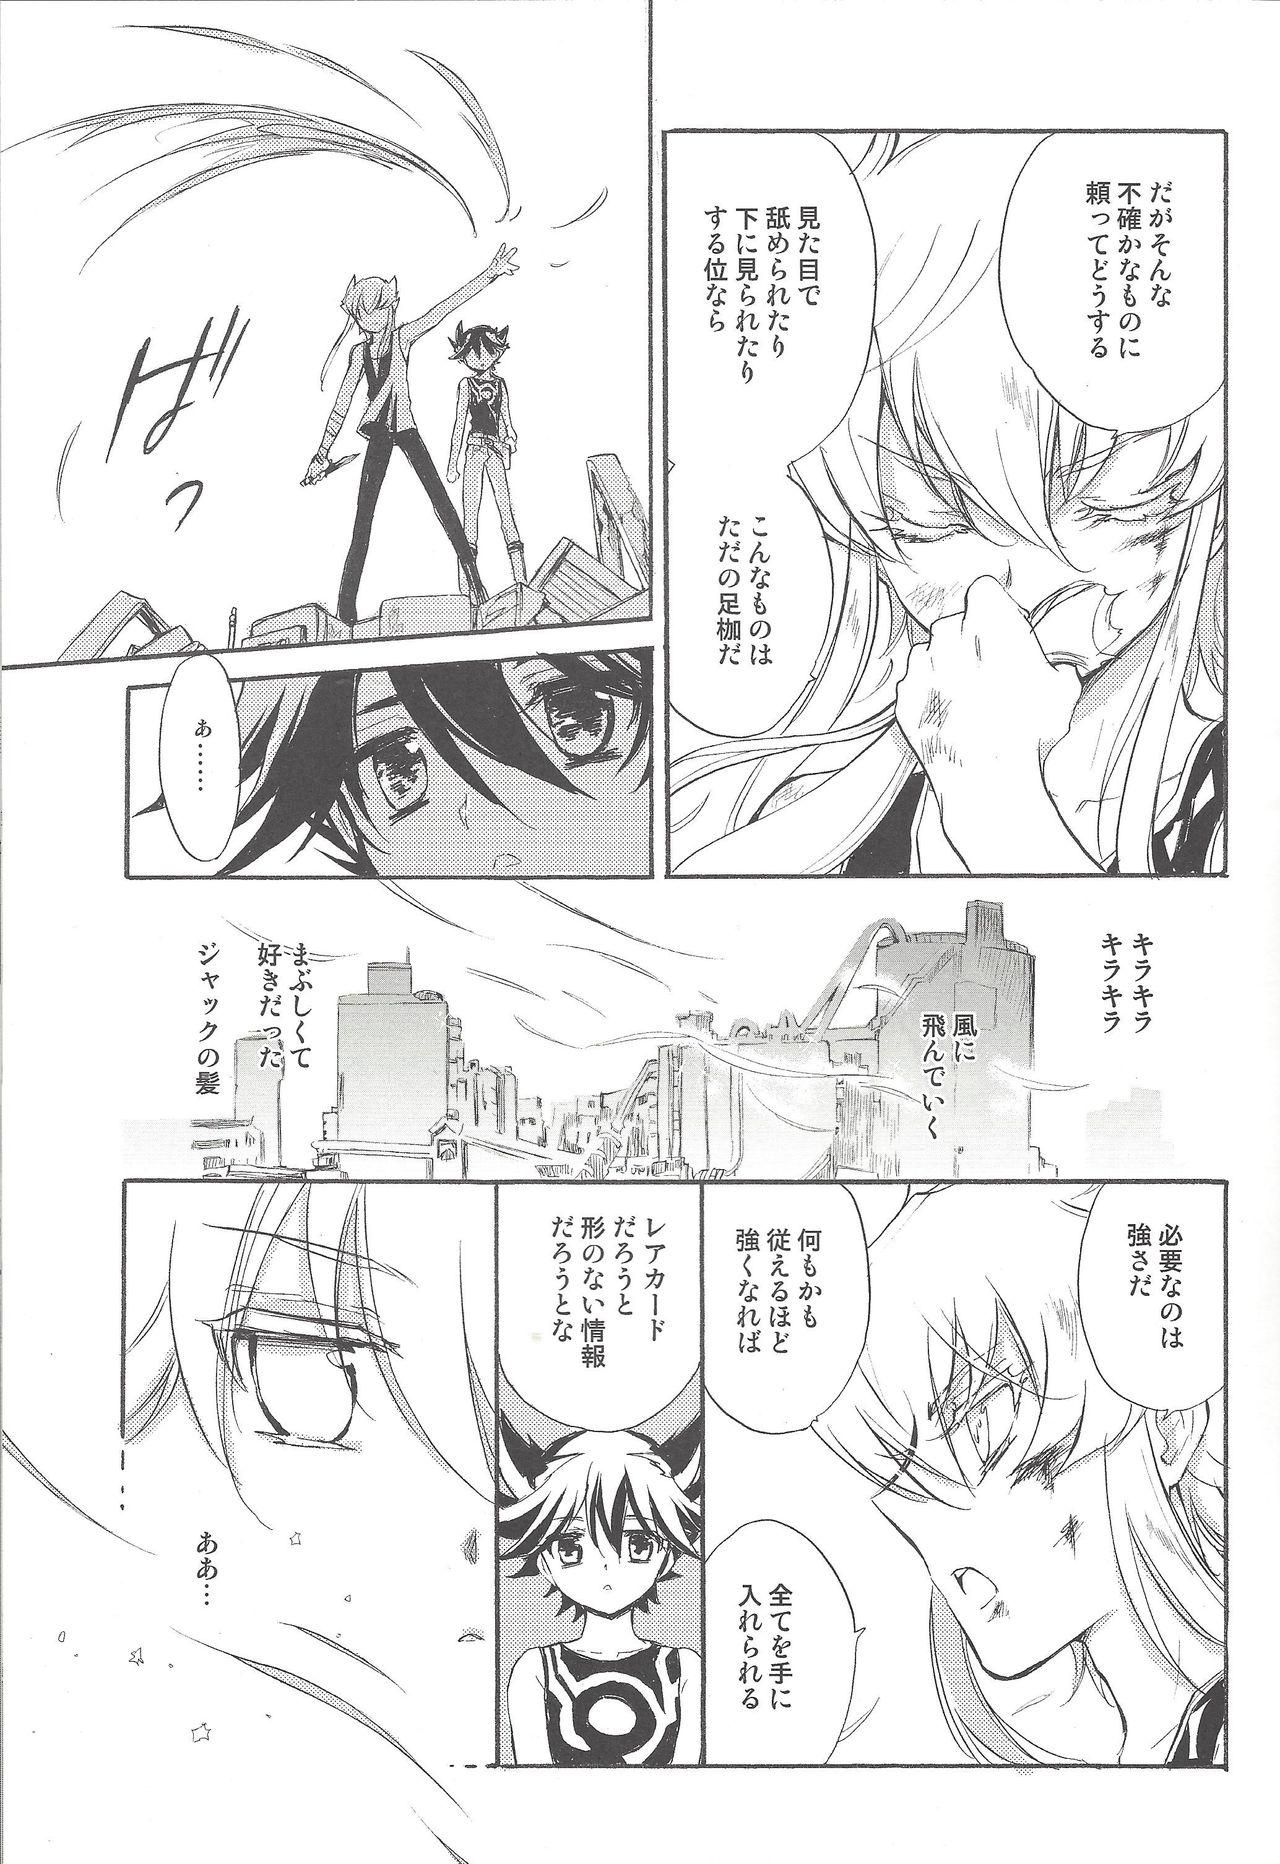 Lezdom Hoshi no Love Letter - Yu-gi-oh 5ds Spoon - Page 12